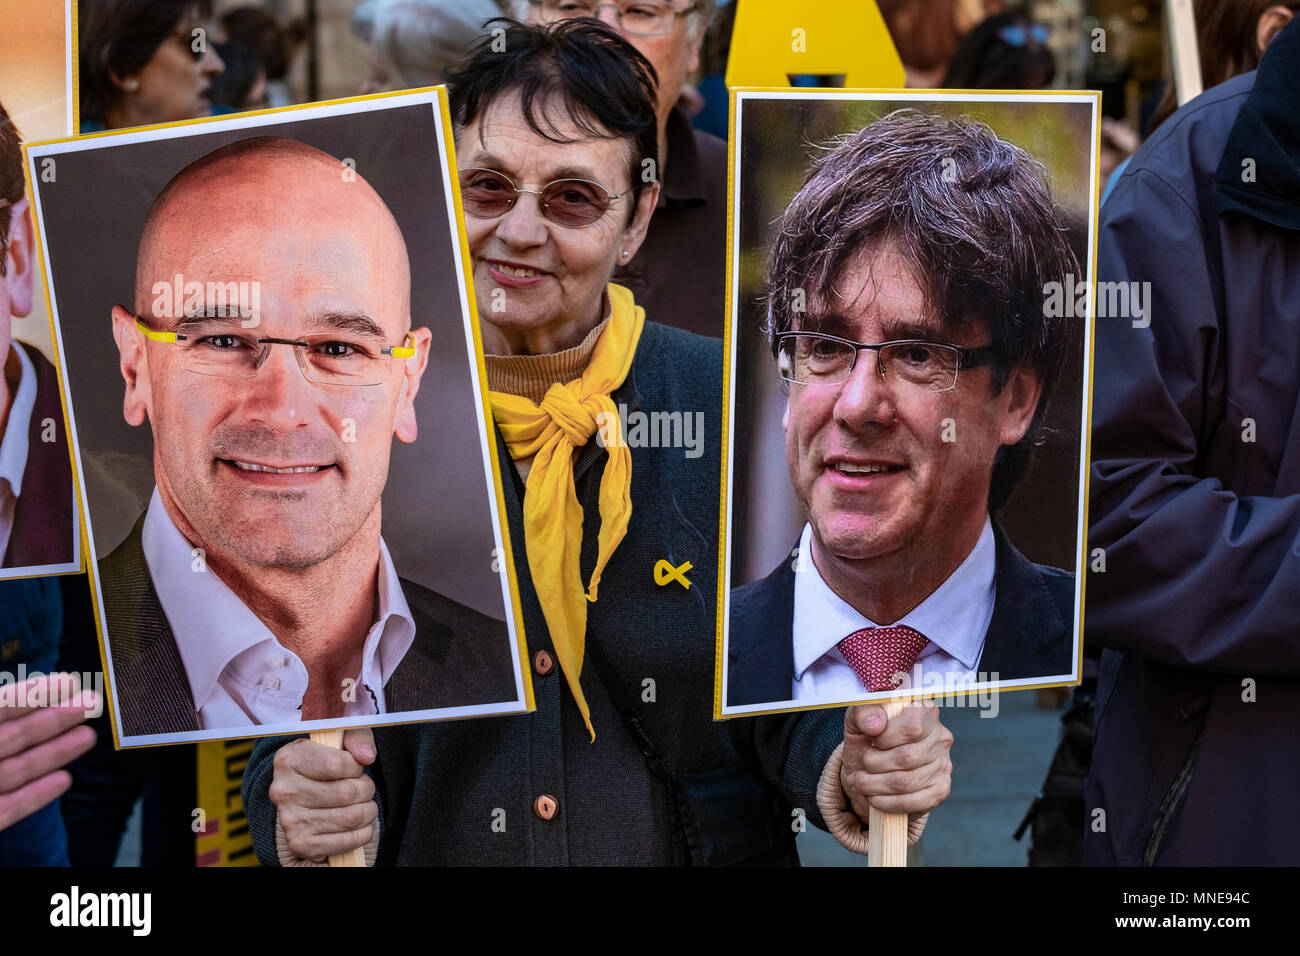 A female protester is seen among the portraits of former President Puigdemont and Councilor Raül Romeva. Act of protest to request the release of political prisoners Jordi Sànchez and Jordi Cuixart who have been in prison for seven months. It is the circumstance that it has been the first act in Catalonia of the president-elect of the Generalitat Qim Torra who has attended the rally. Stock Photo